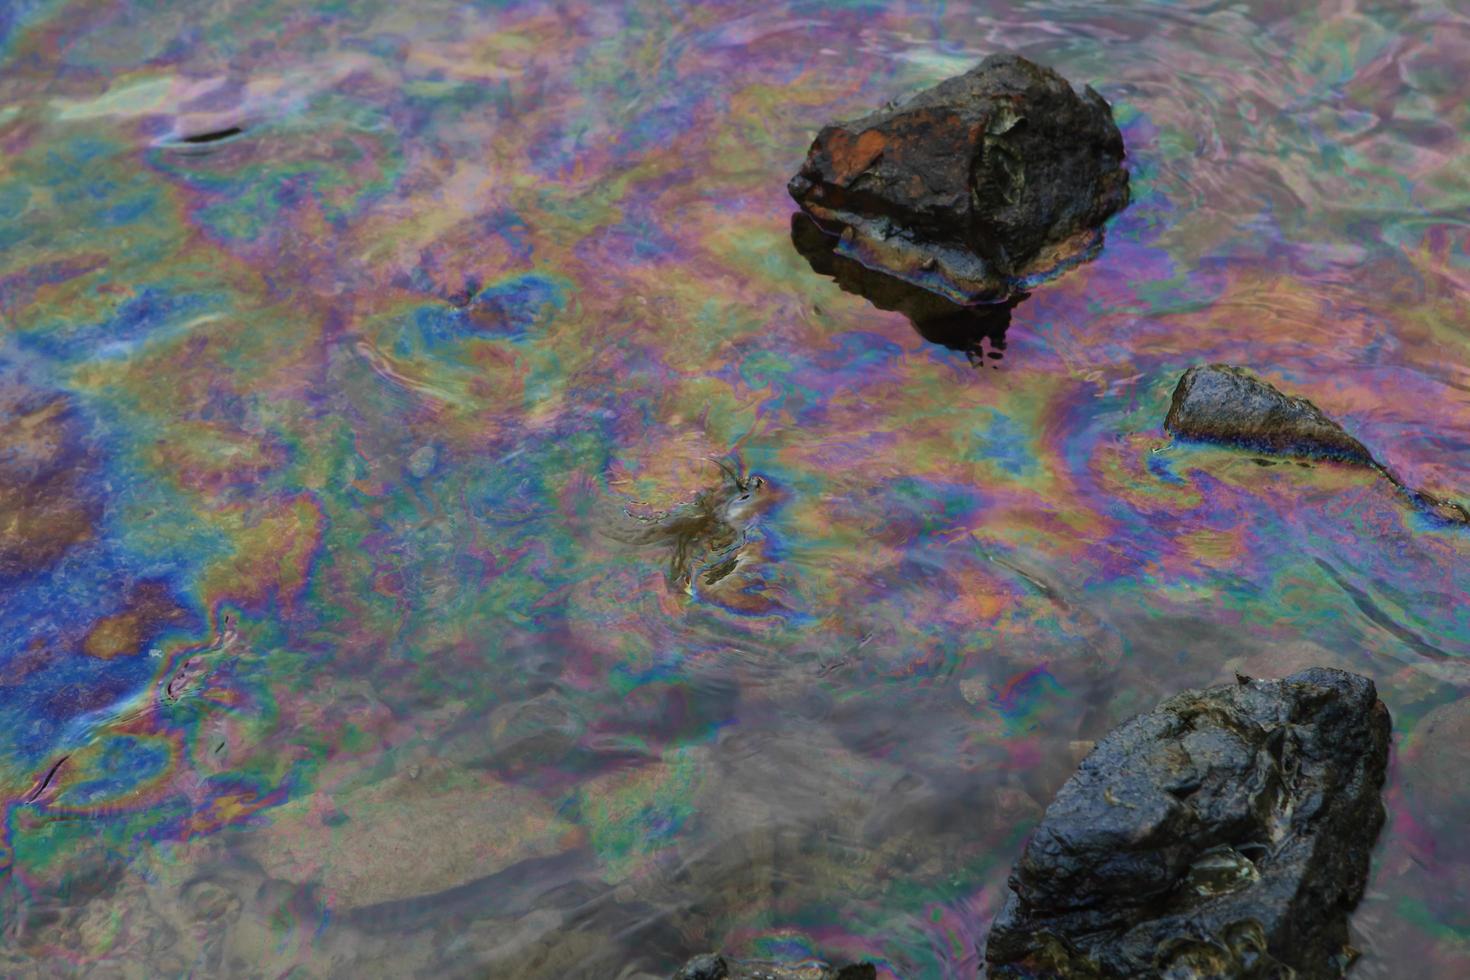 crude oil in sea water and rainbow reflection photo